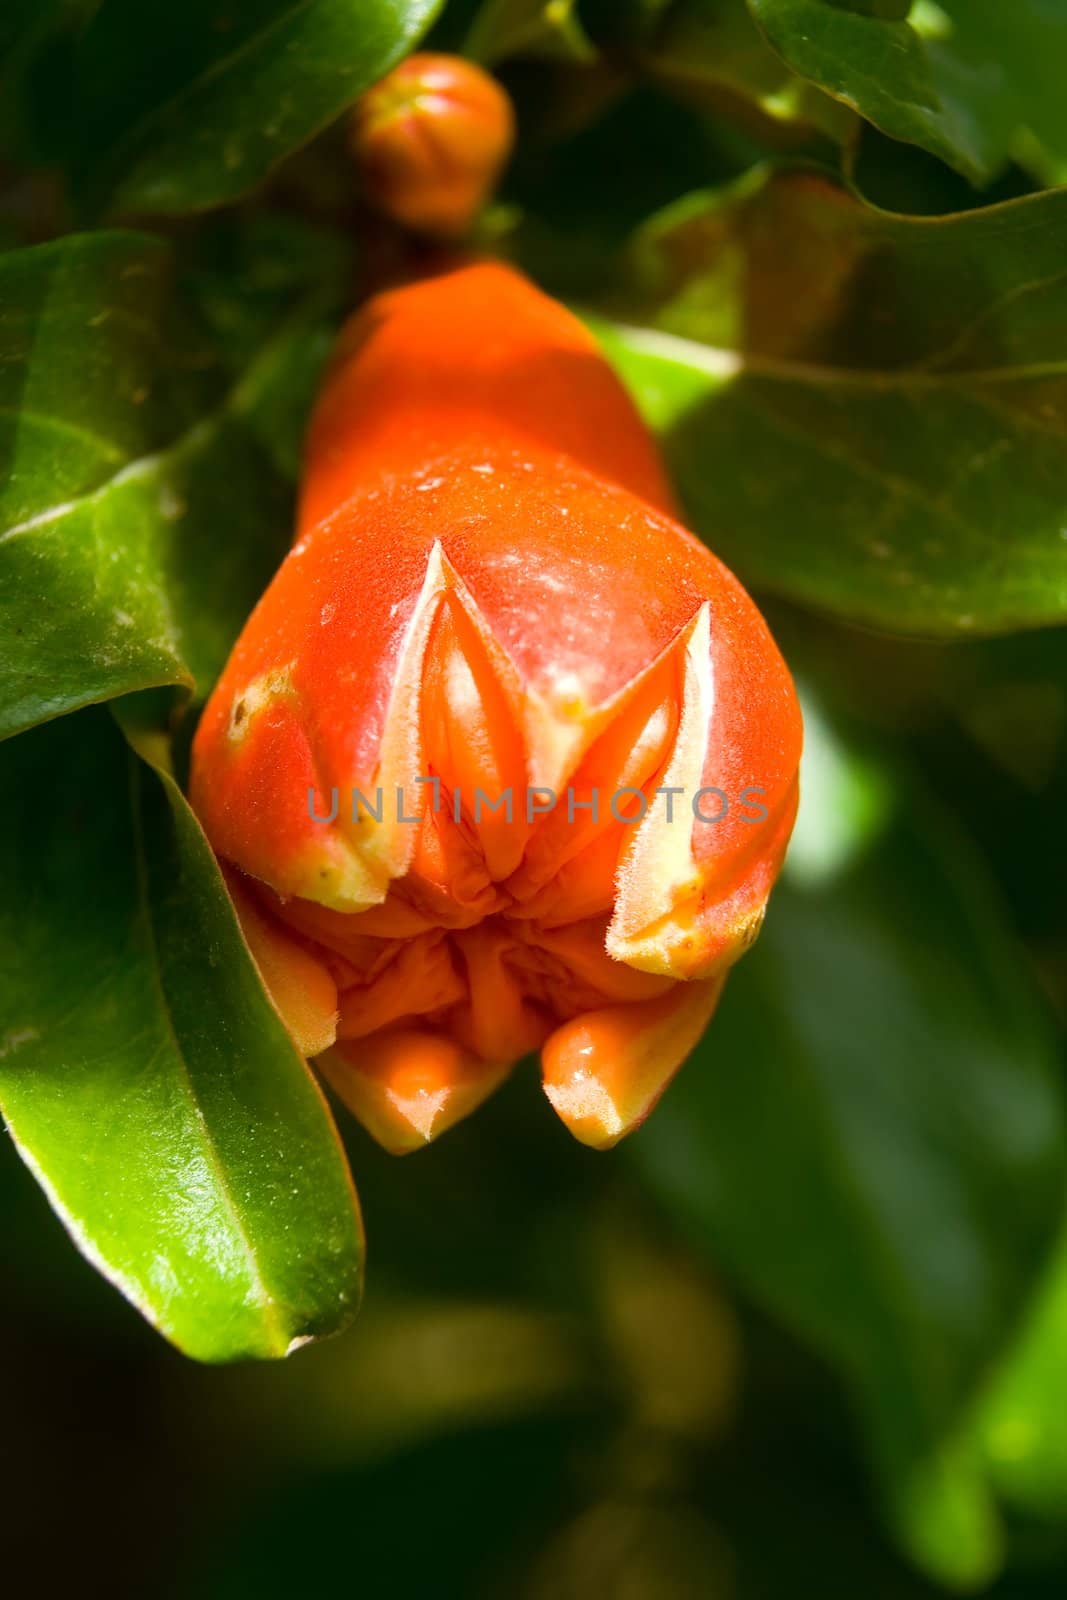 Pomegranate flower in green foliage on a natural background